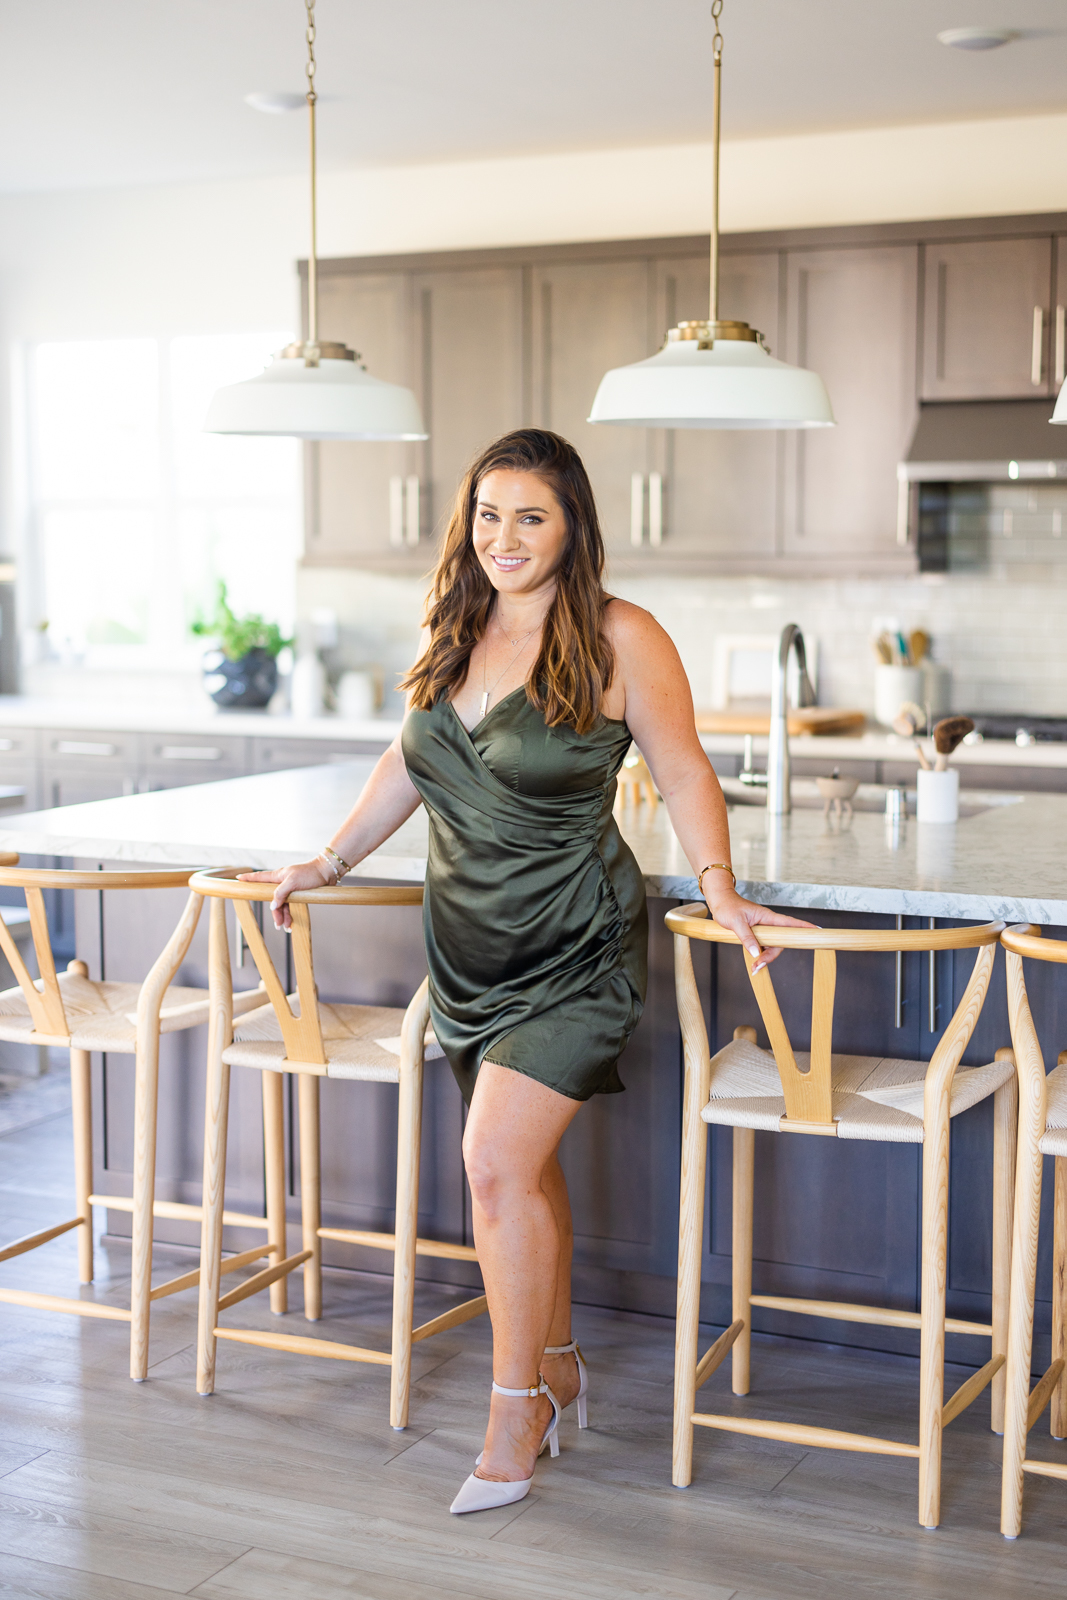 Woman standing next to the bar stools in a kitchen, smiling toward the camera and Meg Marie.